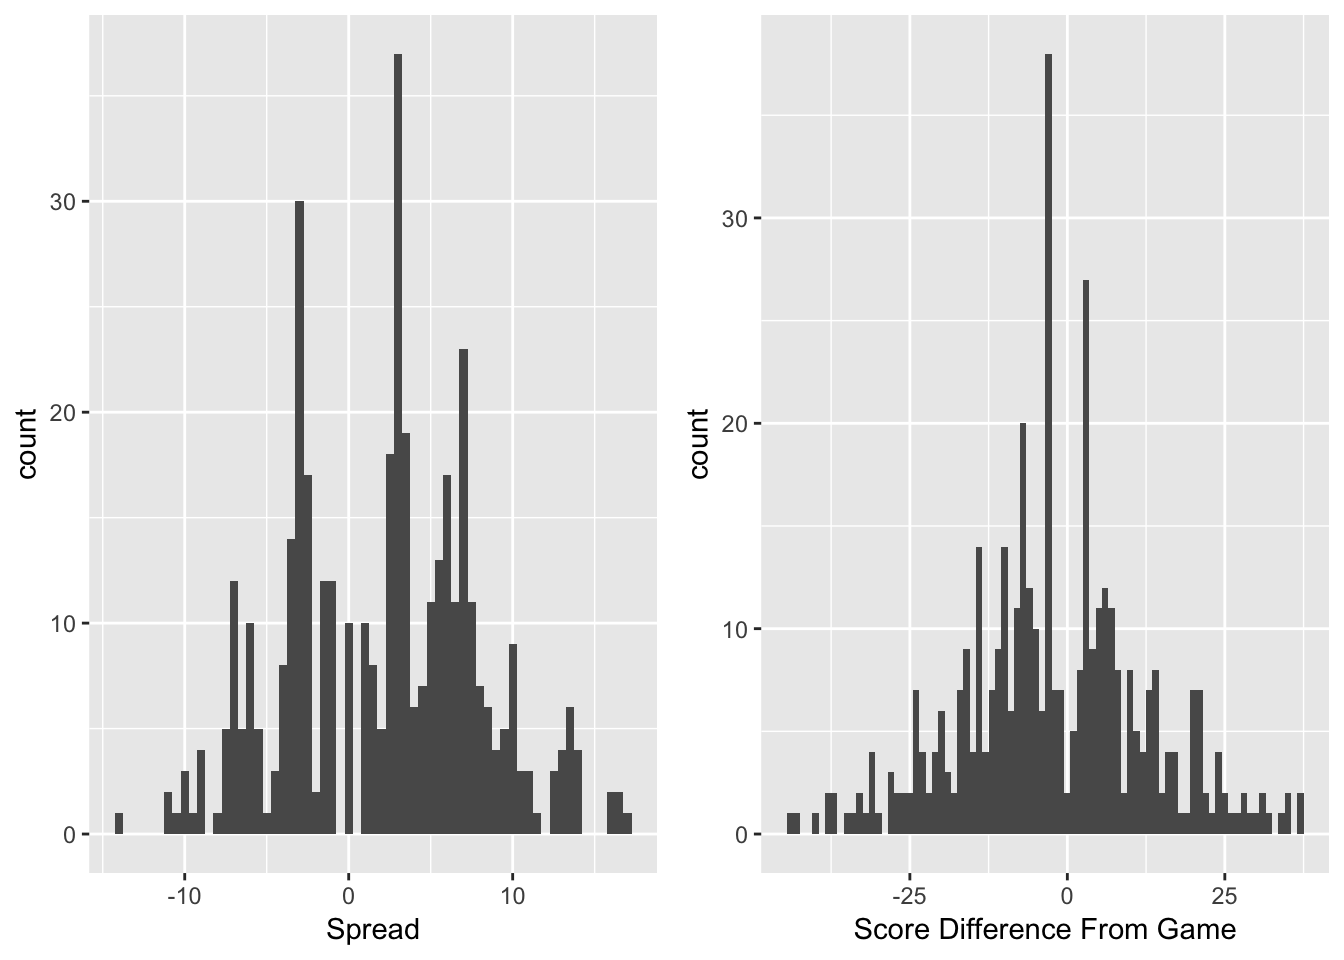 Histograms of Point Spreads and Score Differences from Games